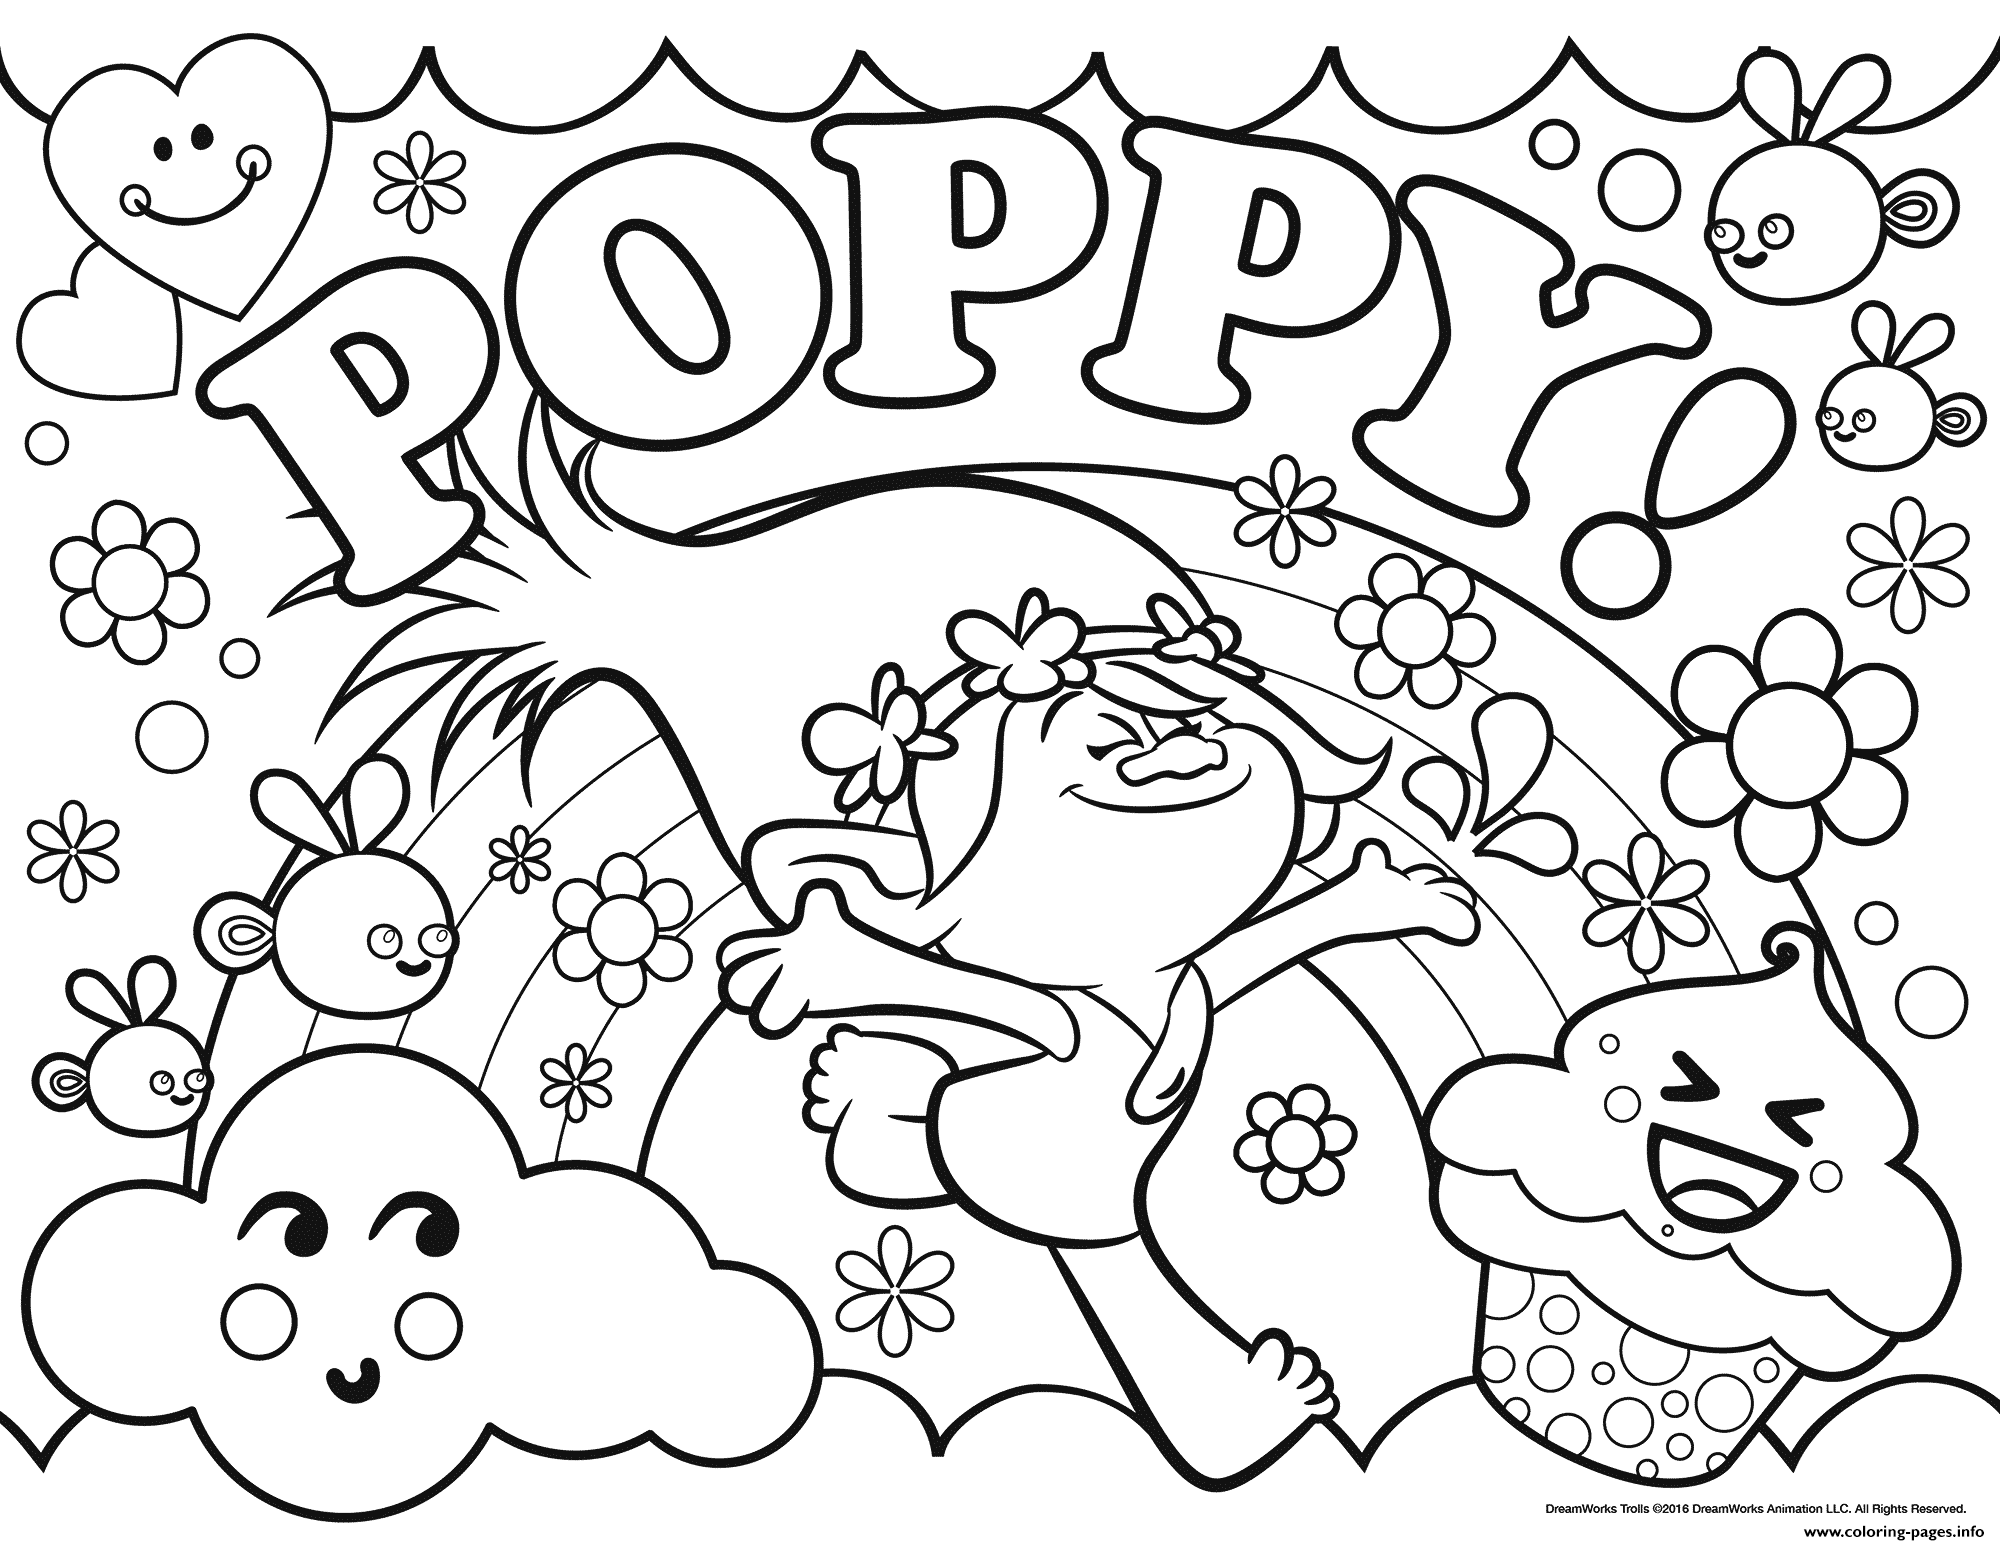 Print Trolls Poppy Coloring Pages Poppy Coloring Page Cartoon Coloring Pages Coloring Books